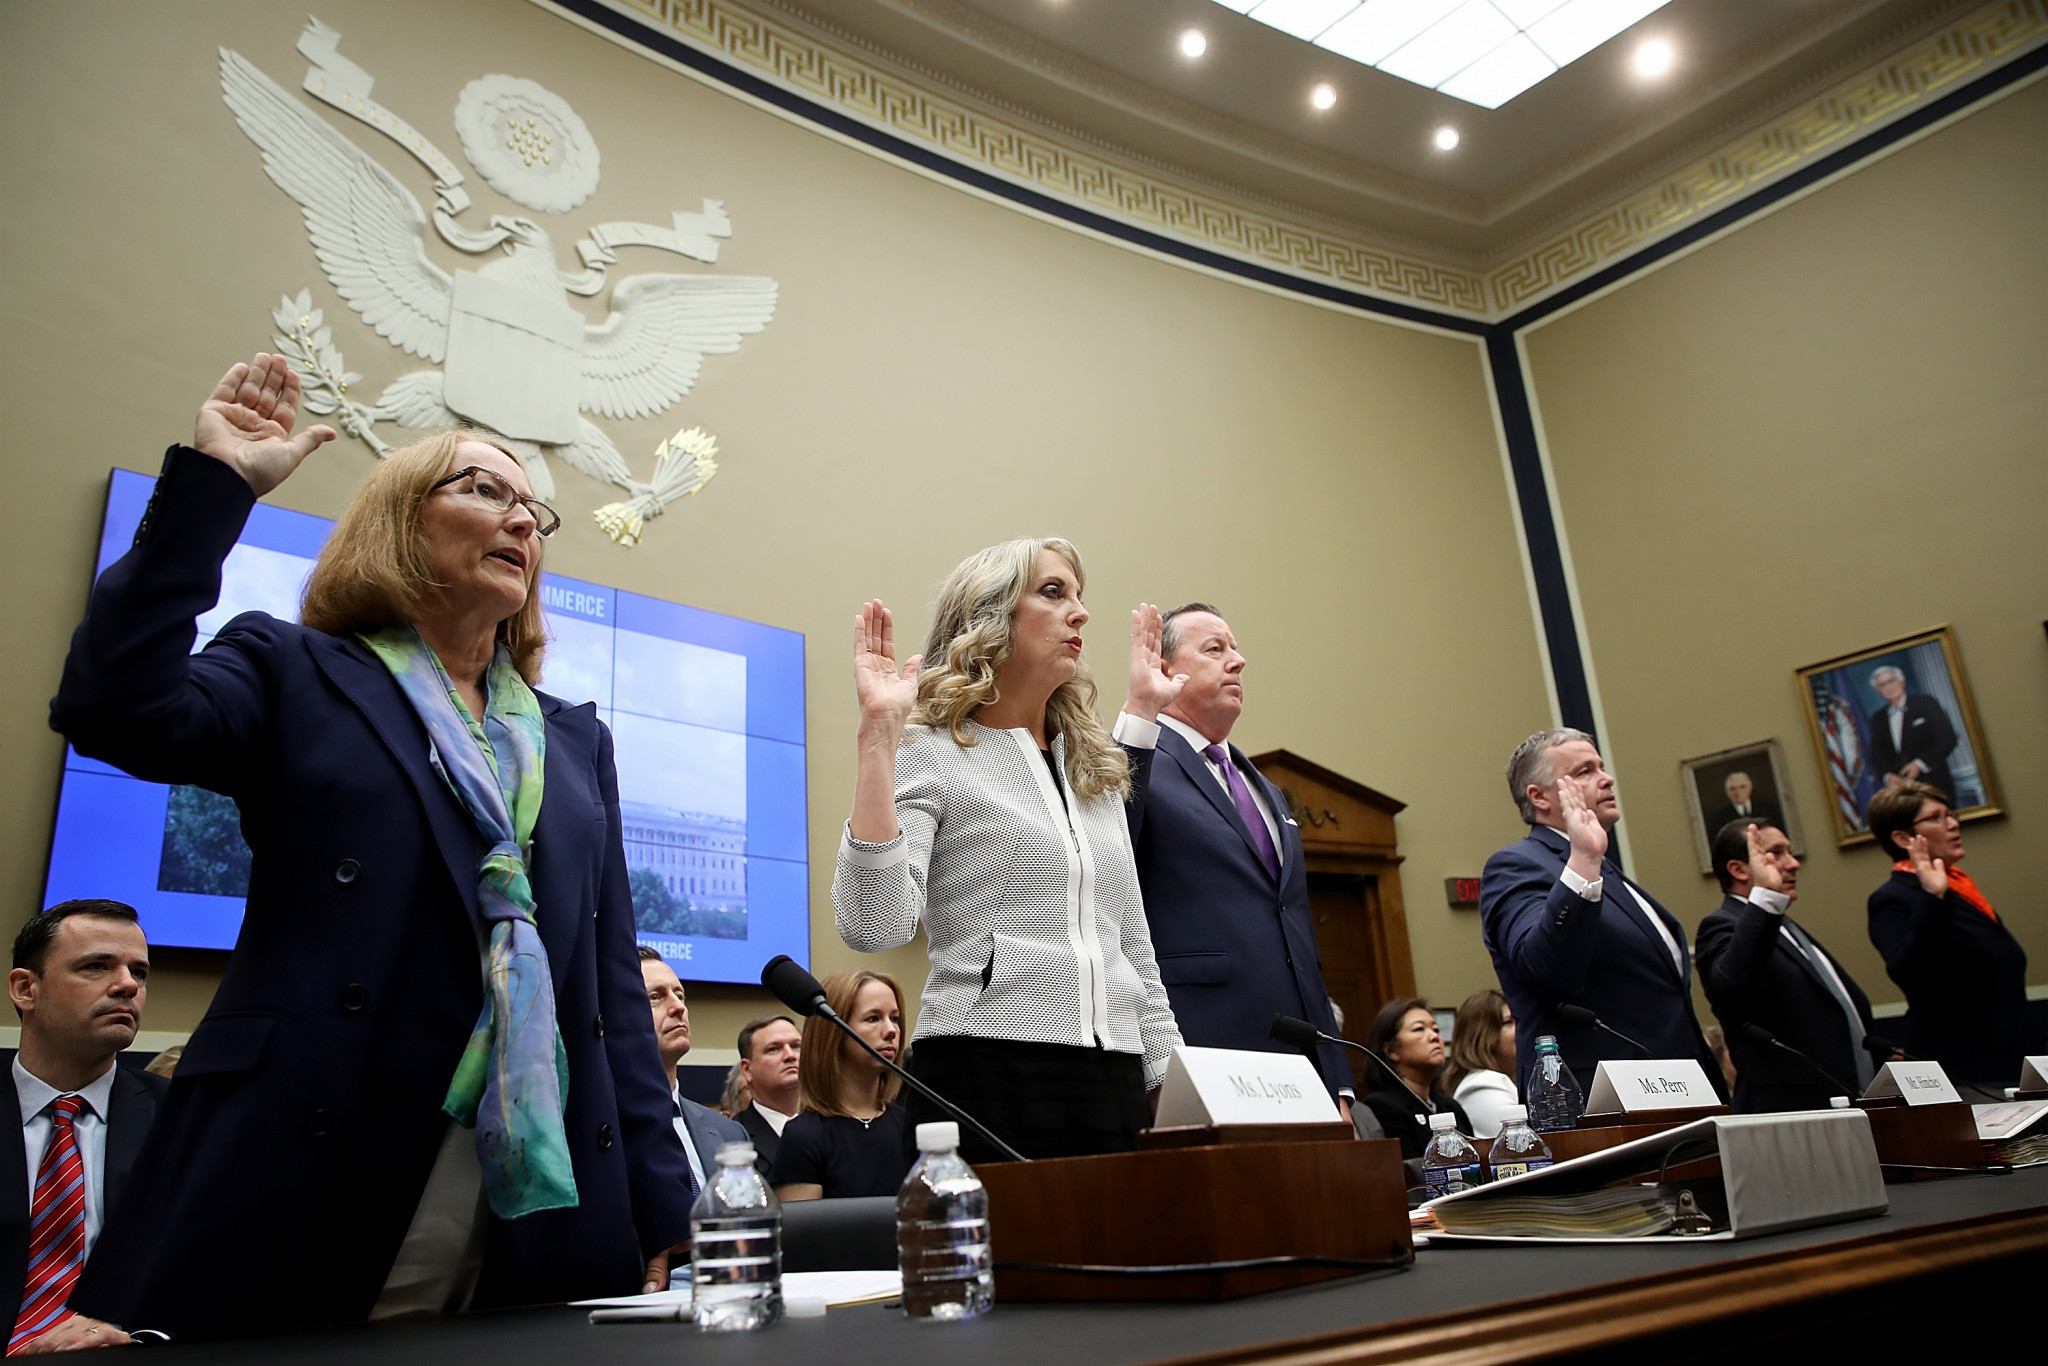 Kerry Perry, second left, testified at a House of Representatives Subcommittee yesterday ©Getty Images